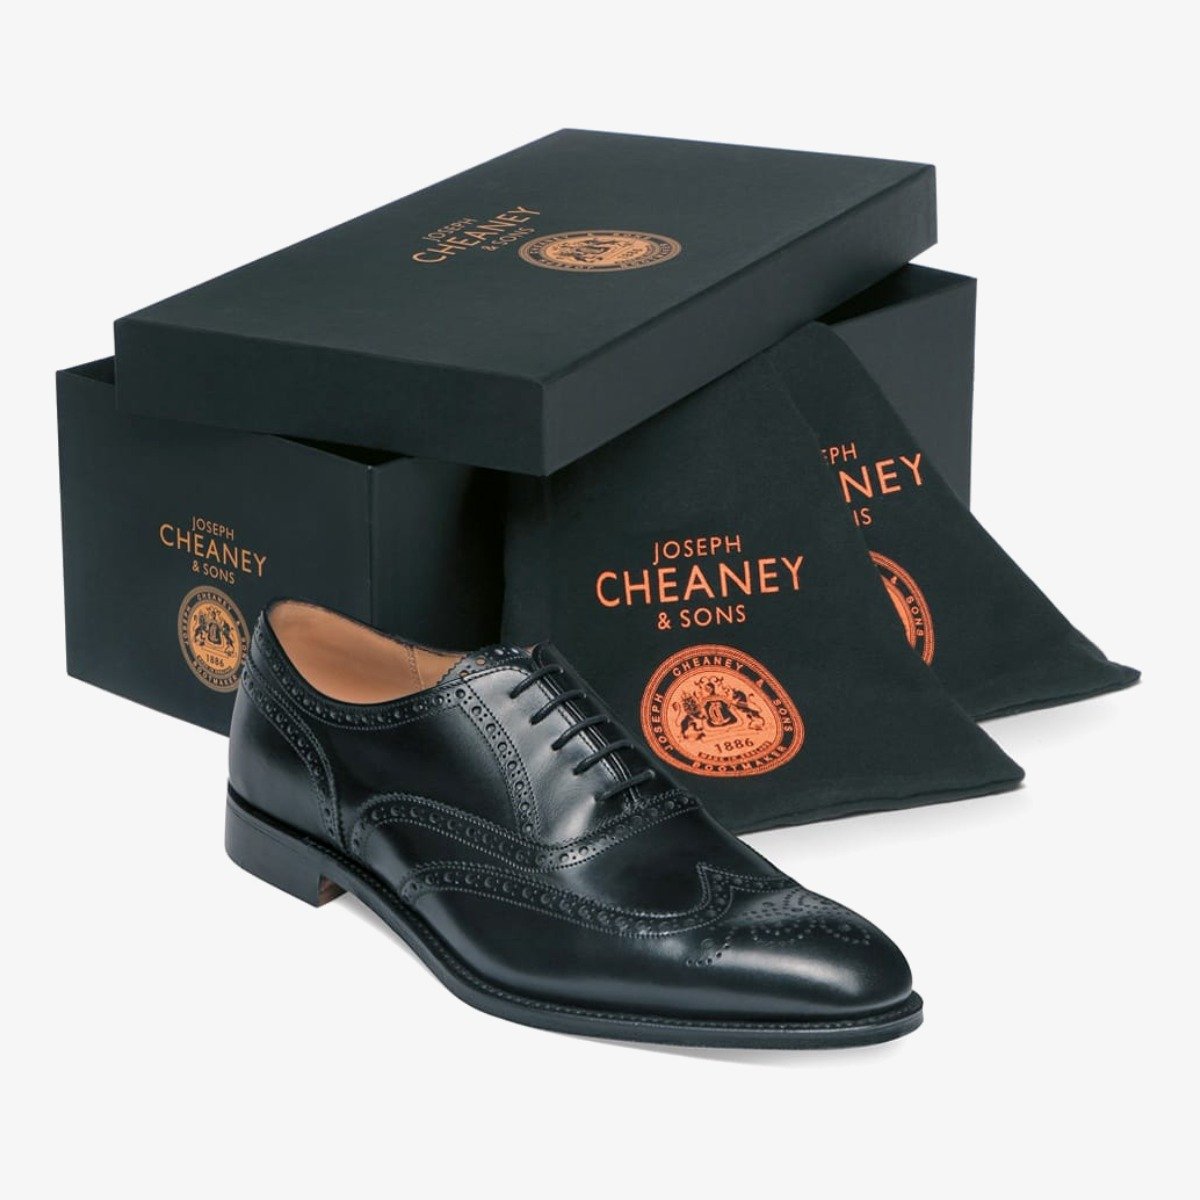 Cheaney Broad II black brogue oxford shoes - Rubber soles